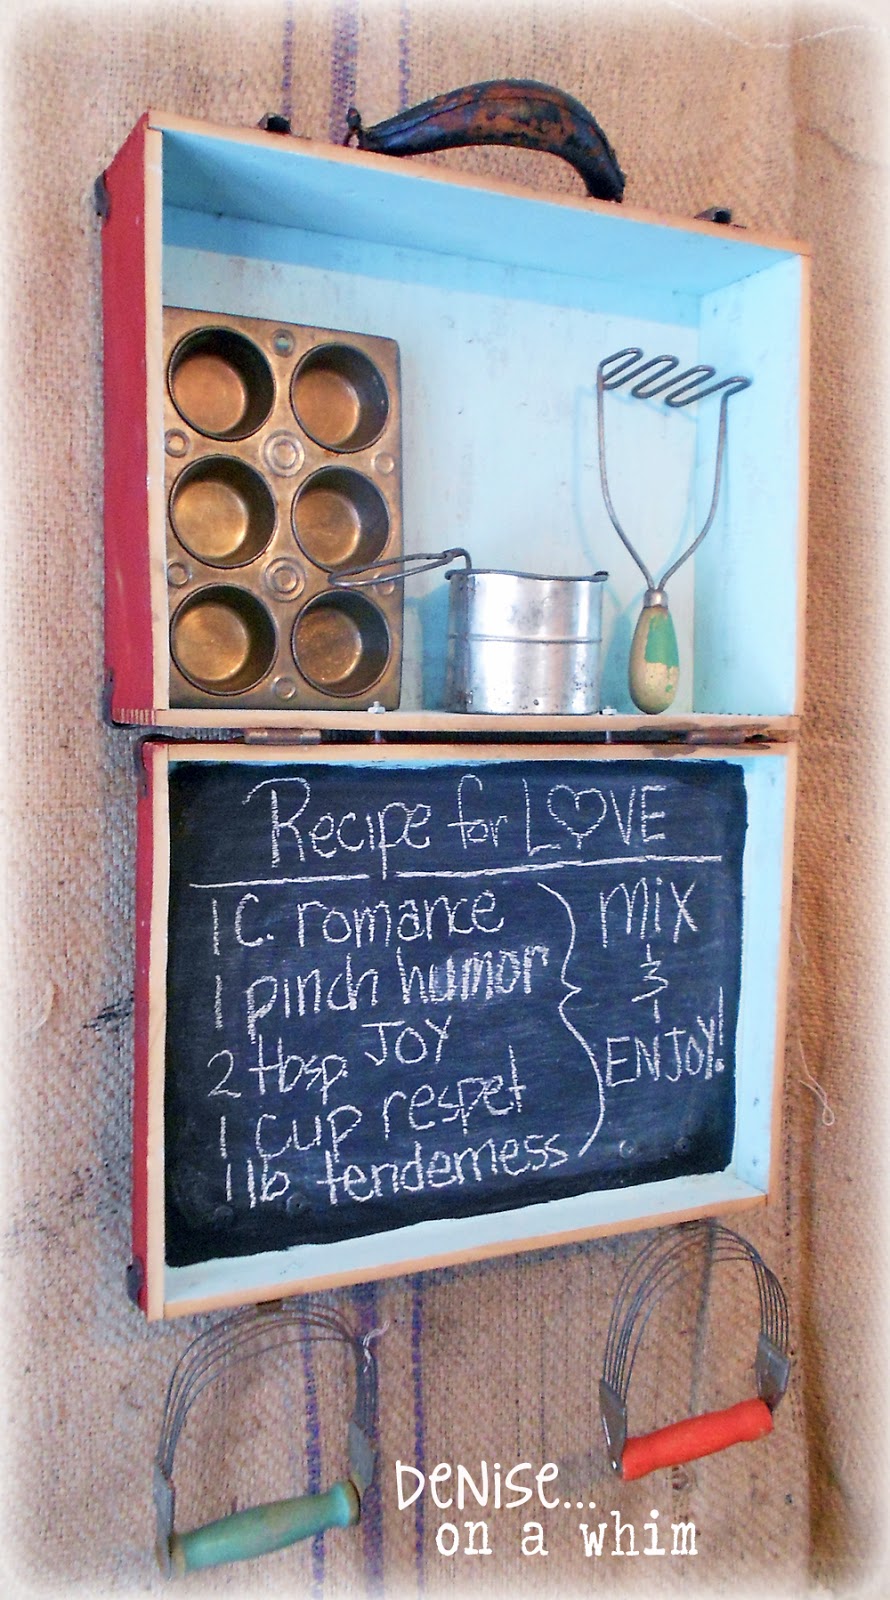 A Vintage Skate Box Is Now and Adorable Shelf and Chalkboard!